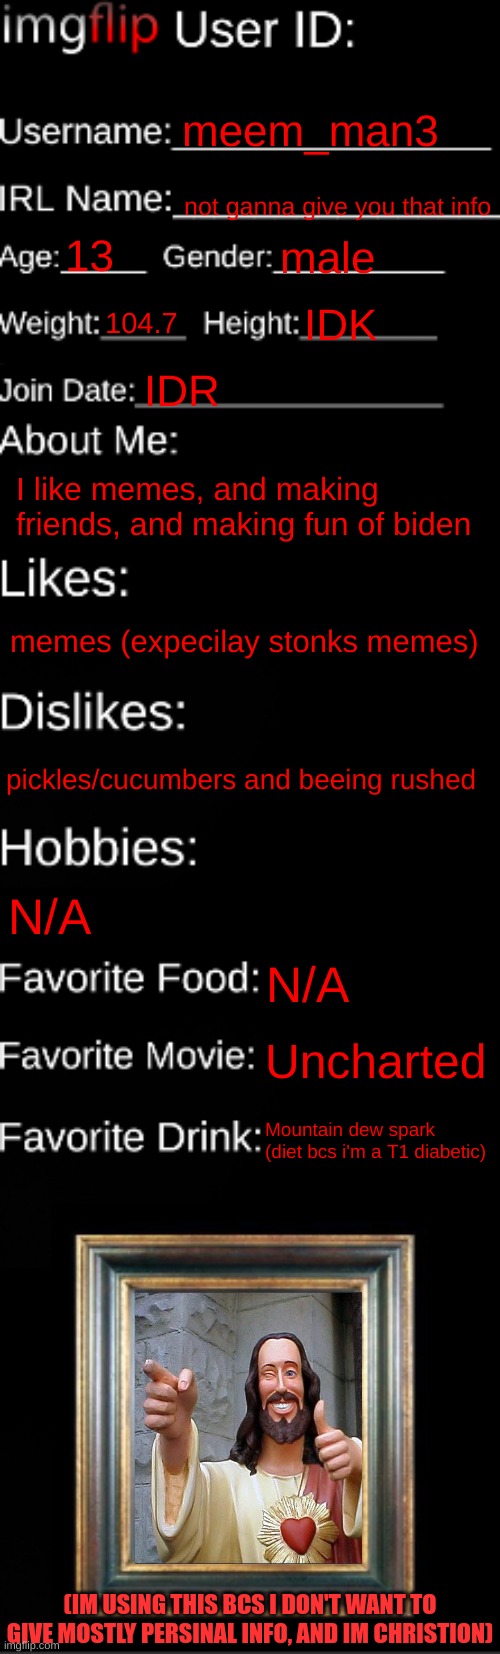 Me in a nutshell, in a nut shell, thats in another nut shell | meem_man3; not ganna give you that info; 13; male; 104.7; IDK; IDR; I like memes, and making friends, and making fun of biden; memes (expecilay stonks memes); pickles/cucumbers and beeing rushed; N/A; N/A; Uncharted; Mountain dew spark (diet bcs i'm a T1 diabetic); (IM USING THIS BCS I DON'T WANT TO GIVE MOSTLY PERSINAL INFO, AND IM CHRISTION) | image tagged in imgflip id card | made w/ Imgflip meme maker